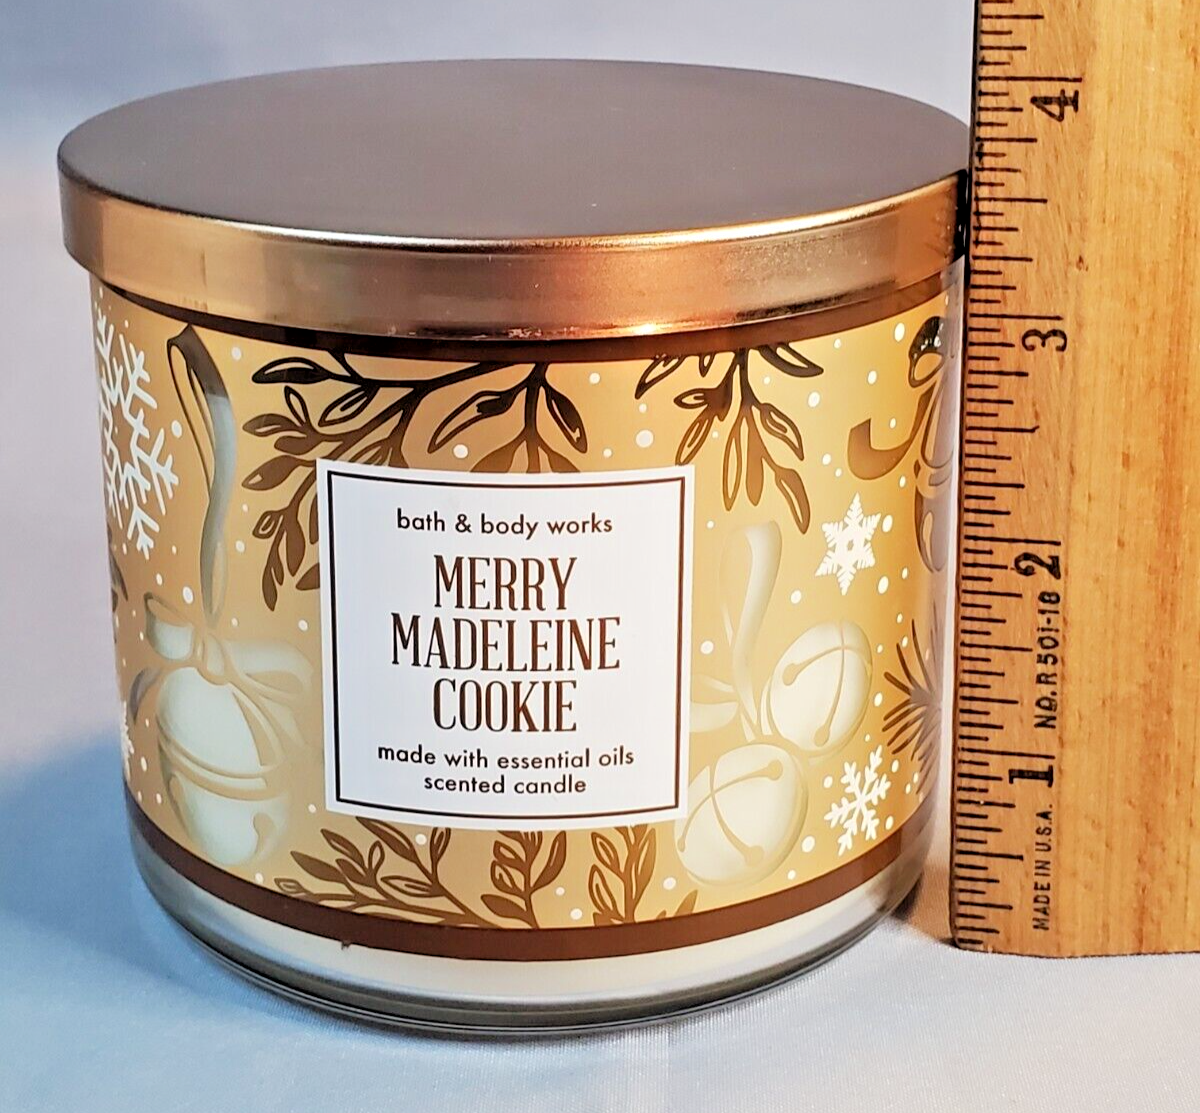 Primary image for Bath & Body Works Merry Madeleine Cookie 3 Wick Scented Jar Candle 14.5oz UnLit